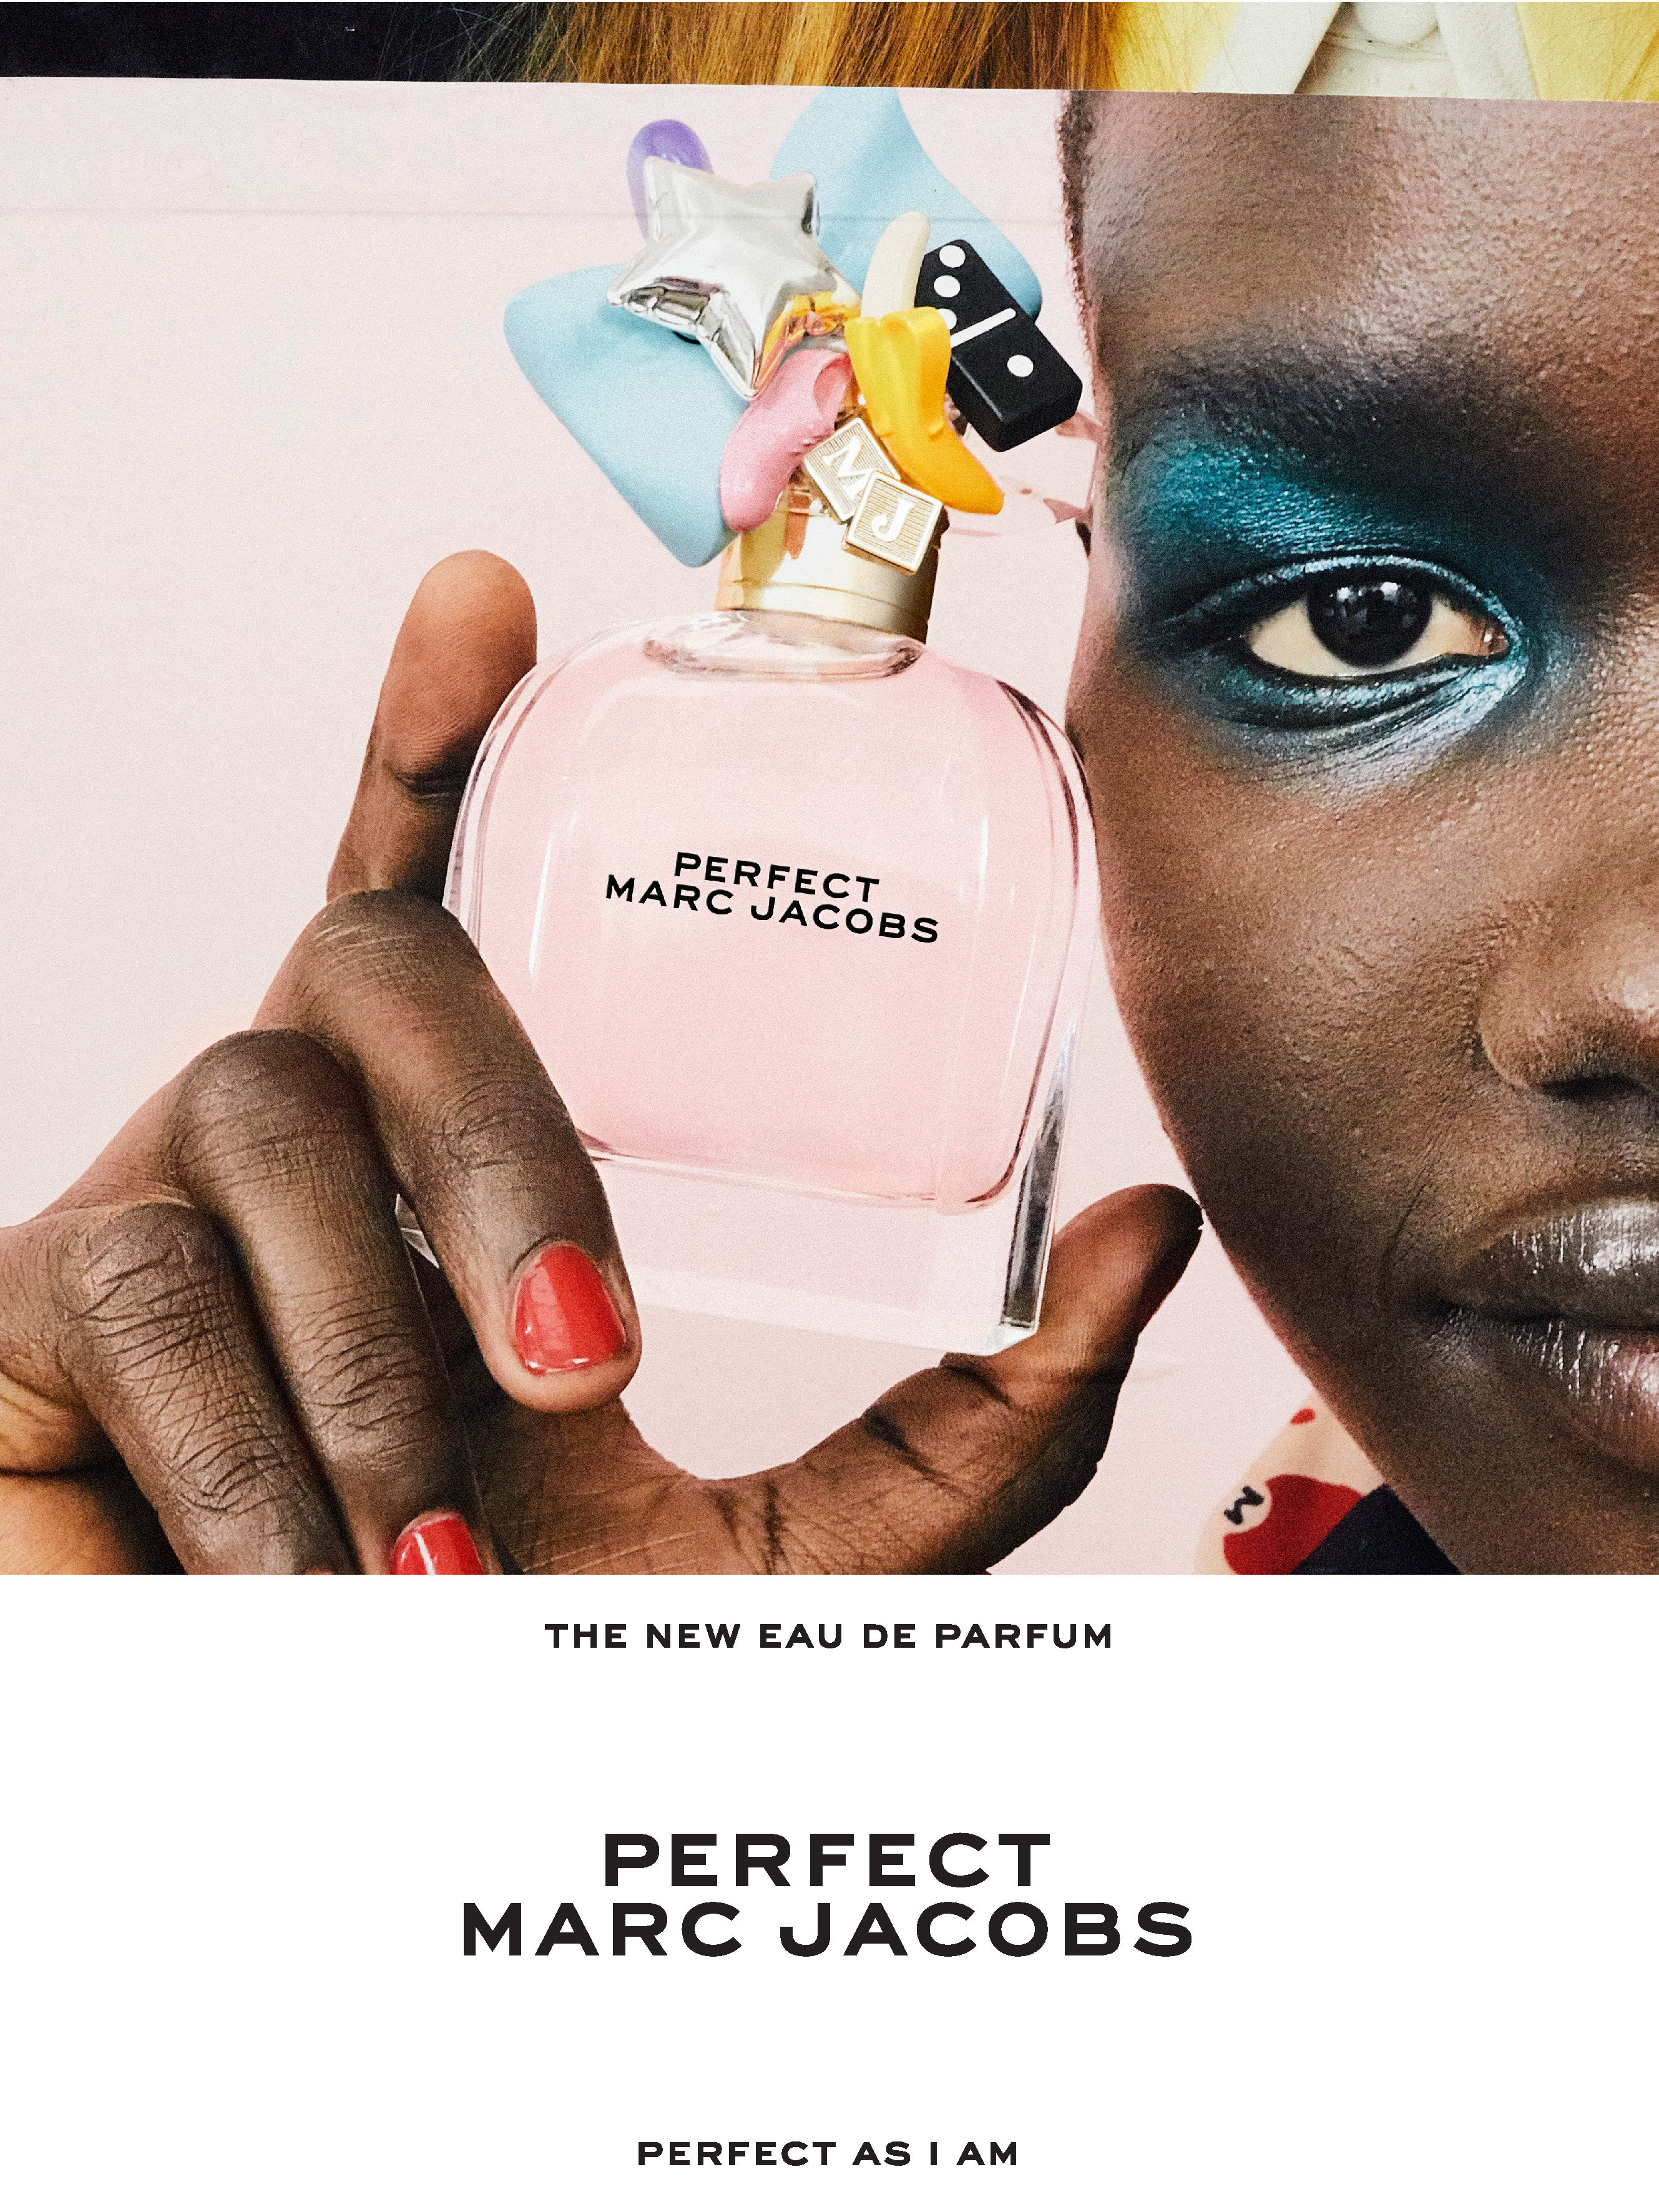 Marc Jacobs - I am so excited to announce that my great